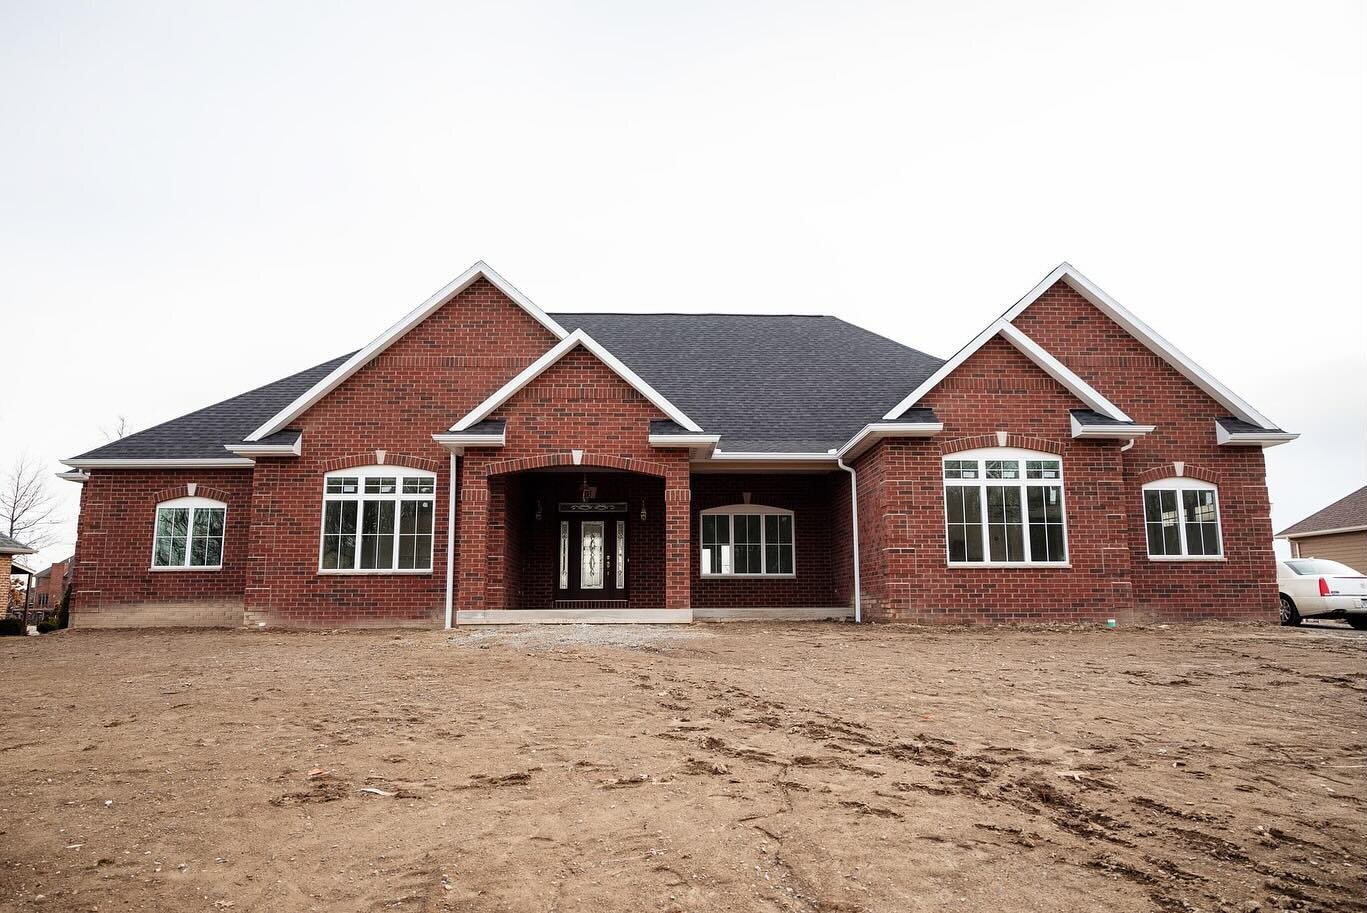 Who&rsquo;s ready to see the inside of this gorgeous home? This home has many beautiful amenities.

You&rsquo;ll have to enjoy these photos for now - come back next week for the full reveal!

&bull;
&bull;
#mbcobuilds #mbcobuildsglenmar #findlayoh #f